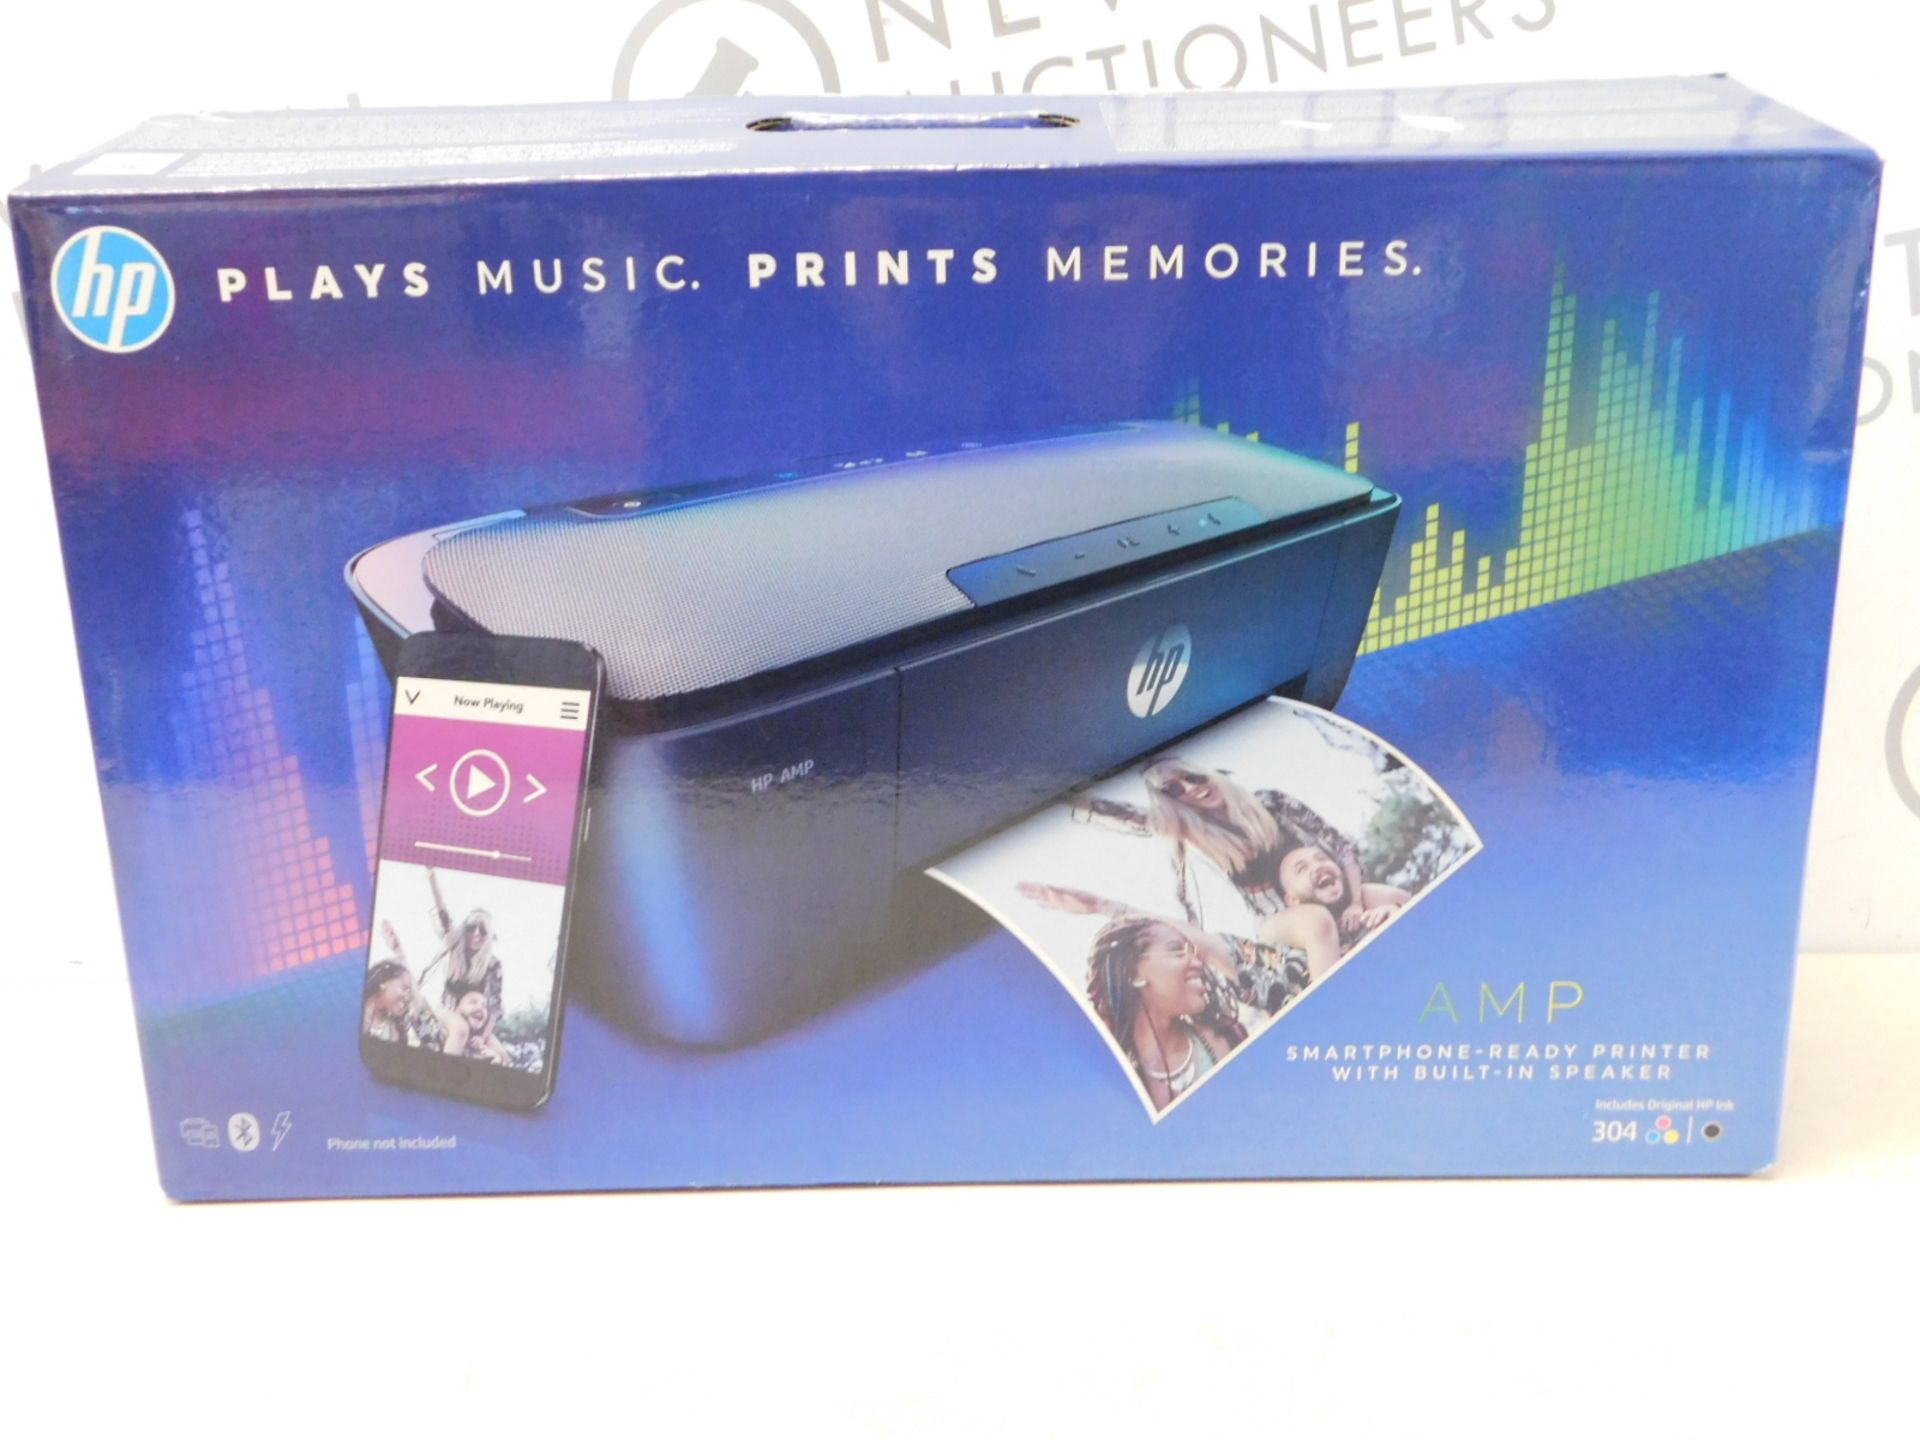 1 BOXED HP AMP 130 THREE-IN-ONE INKJET PRINTER WITH BLUETOOTH SPEAKER RRP Â£129.99